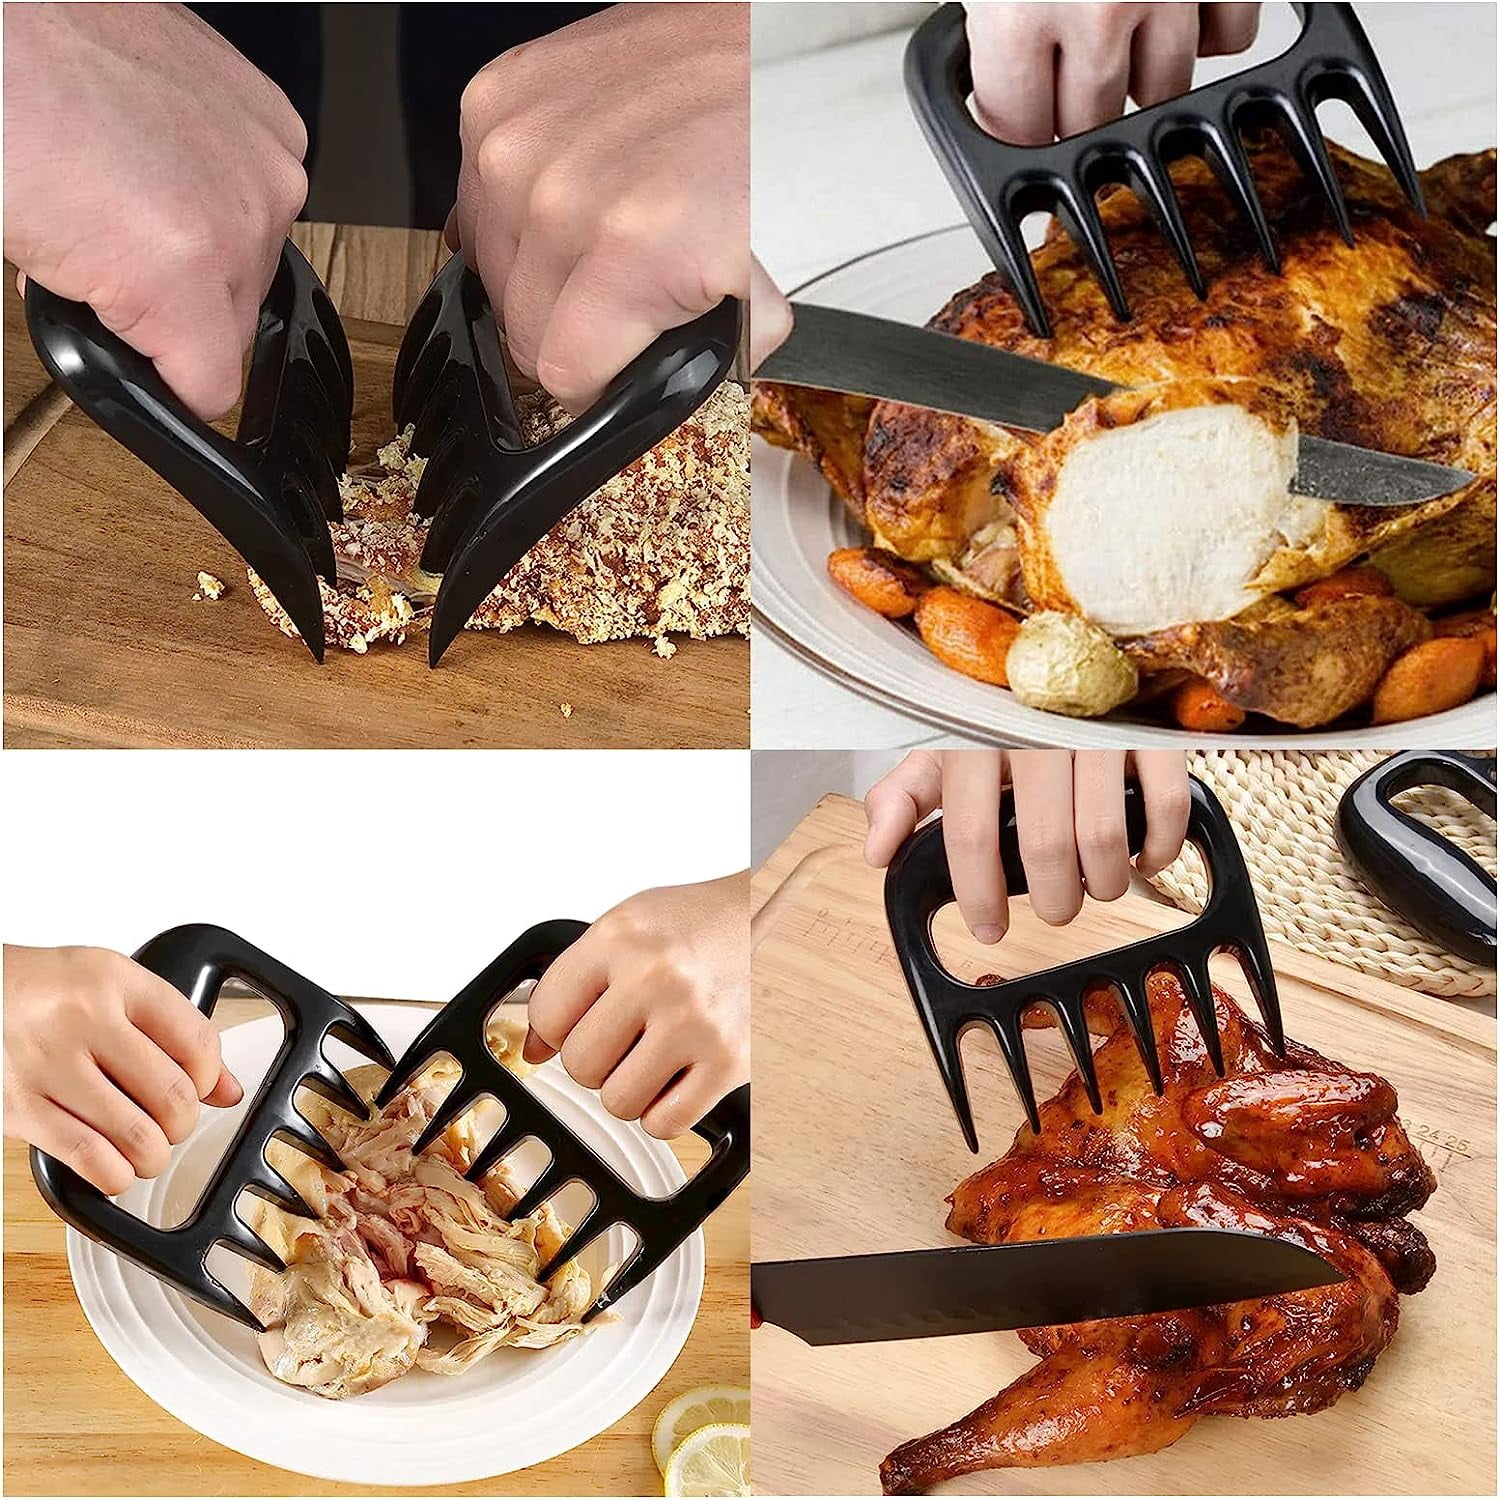 Meat Shredder, BBQ Shredding Claw Tools, Pork Pullers Meat Shred Claws,  Metal Pulling Forks Barbecue Claws, Chicken, Turkey, Brisket, etc